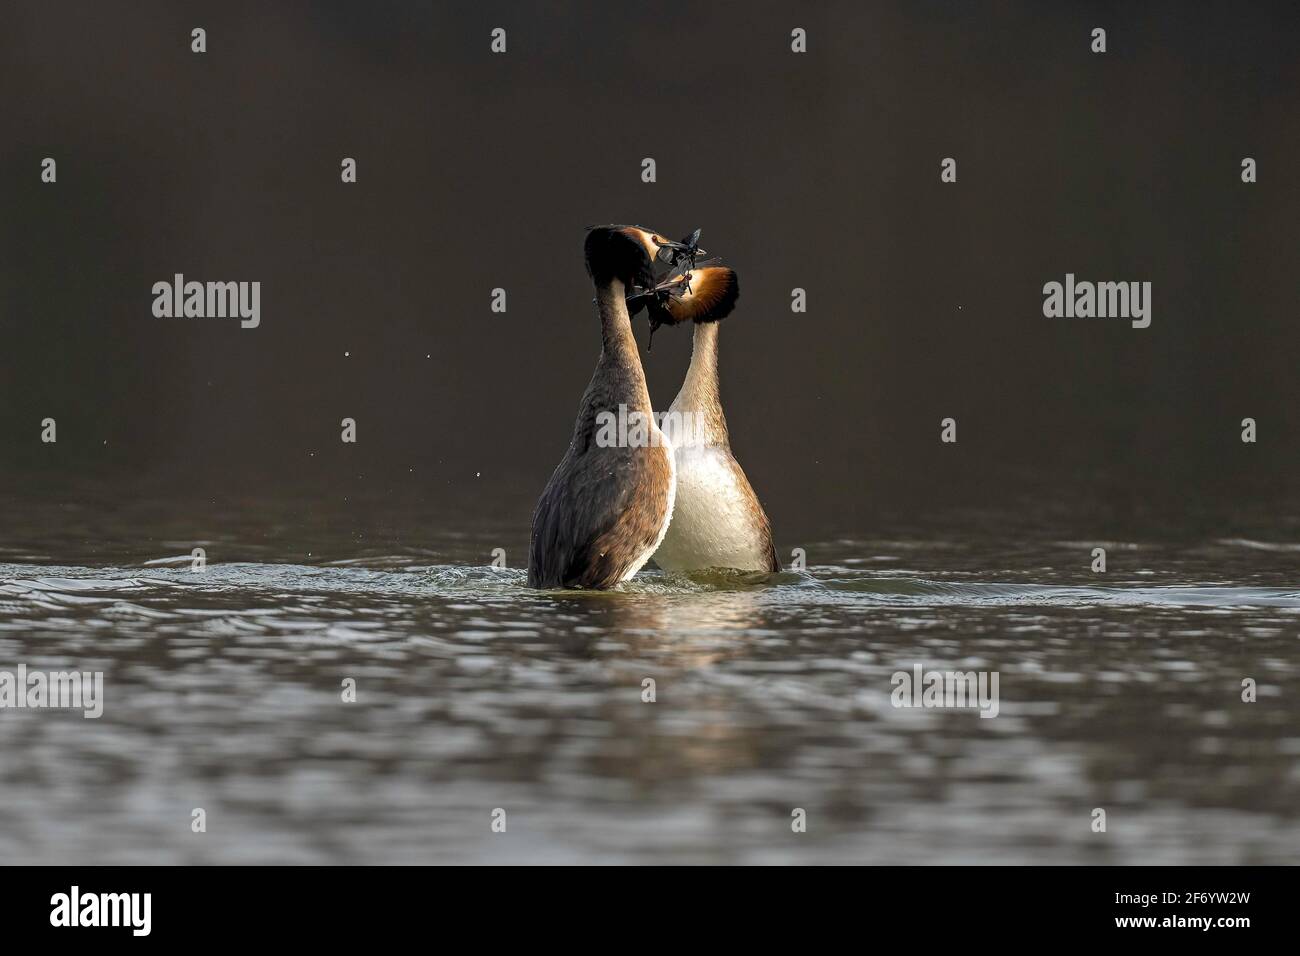 Great crested grebes (Podiceps cristatus) pair performing part of the courtship ritual known as the weed dance. Stock Photo